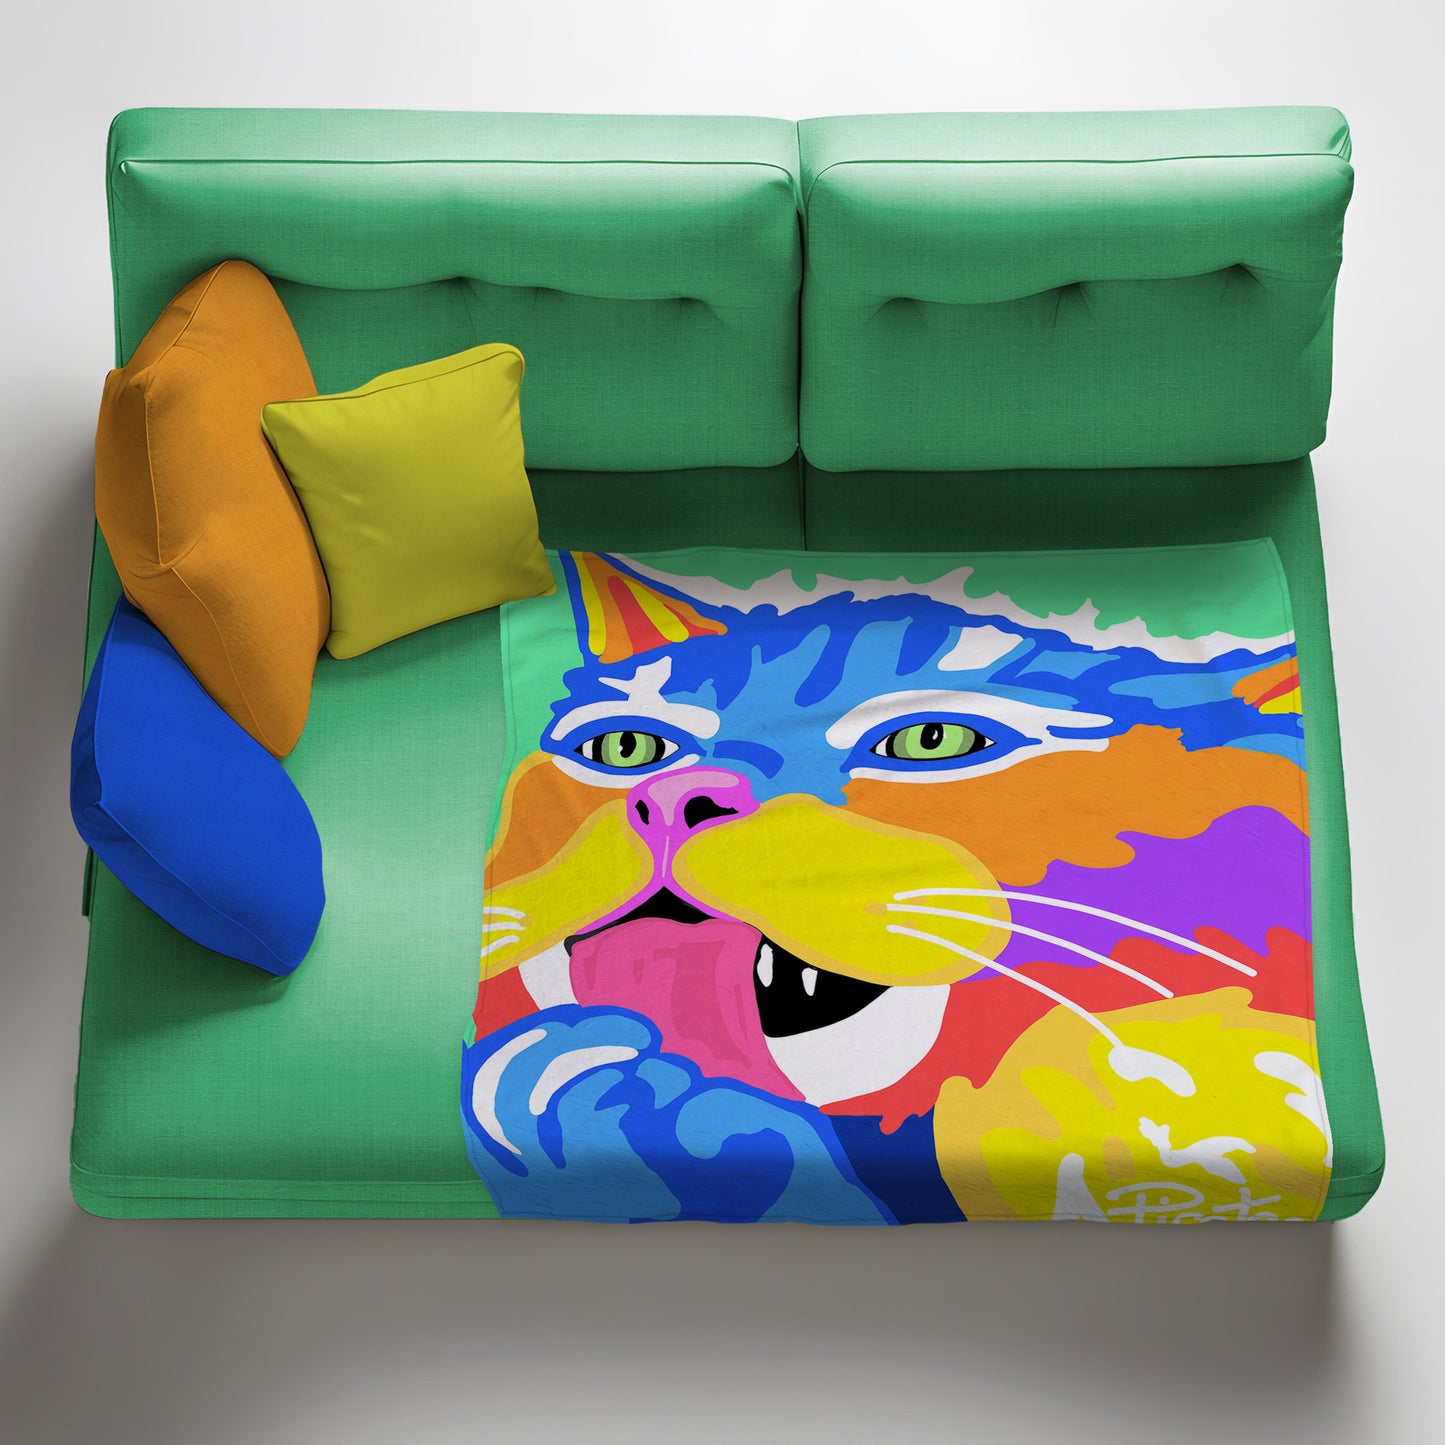 Paw Licious Cat Light Weight Fleece Blanket by Picatso